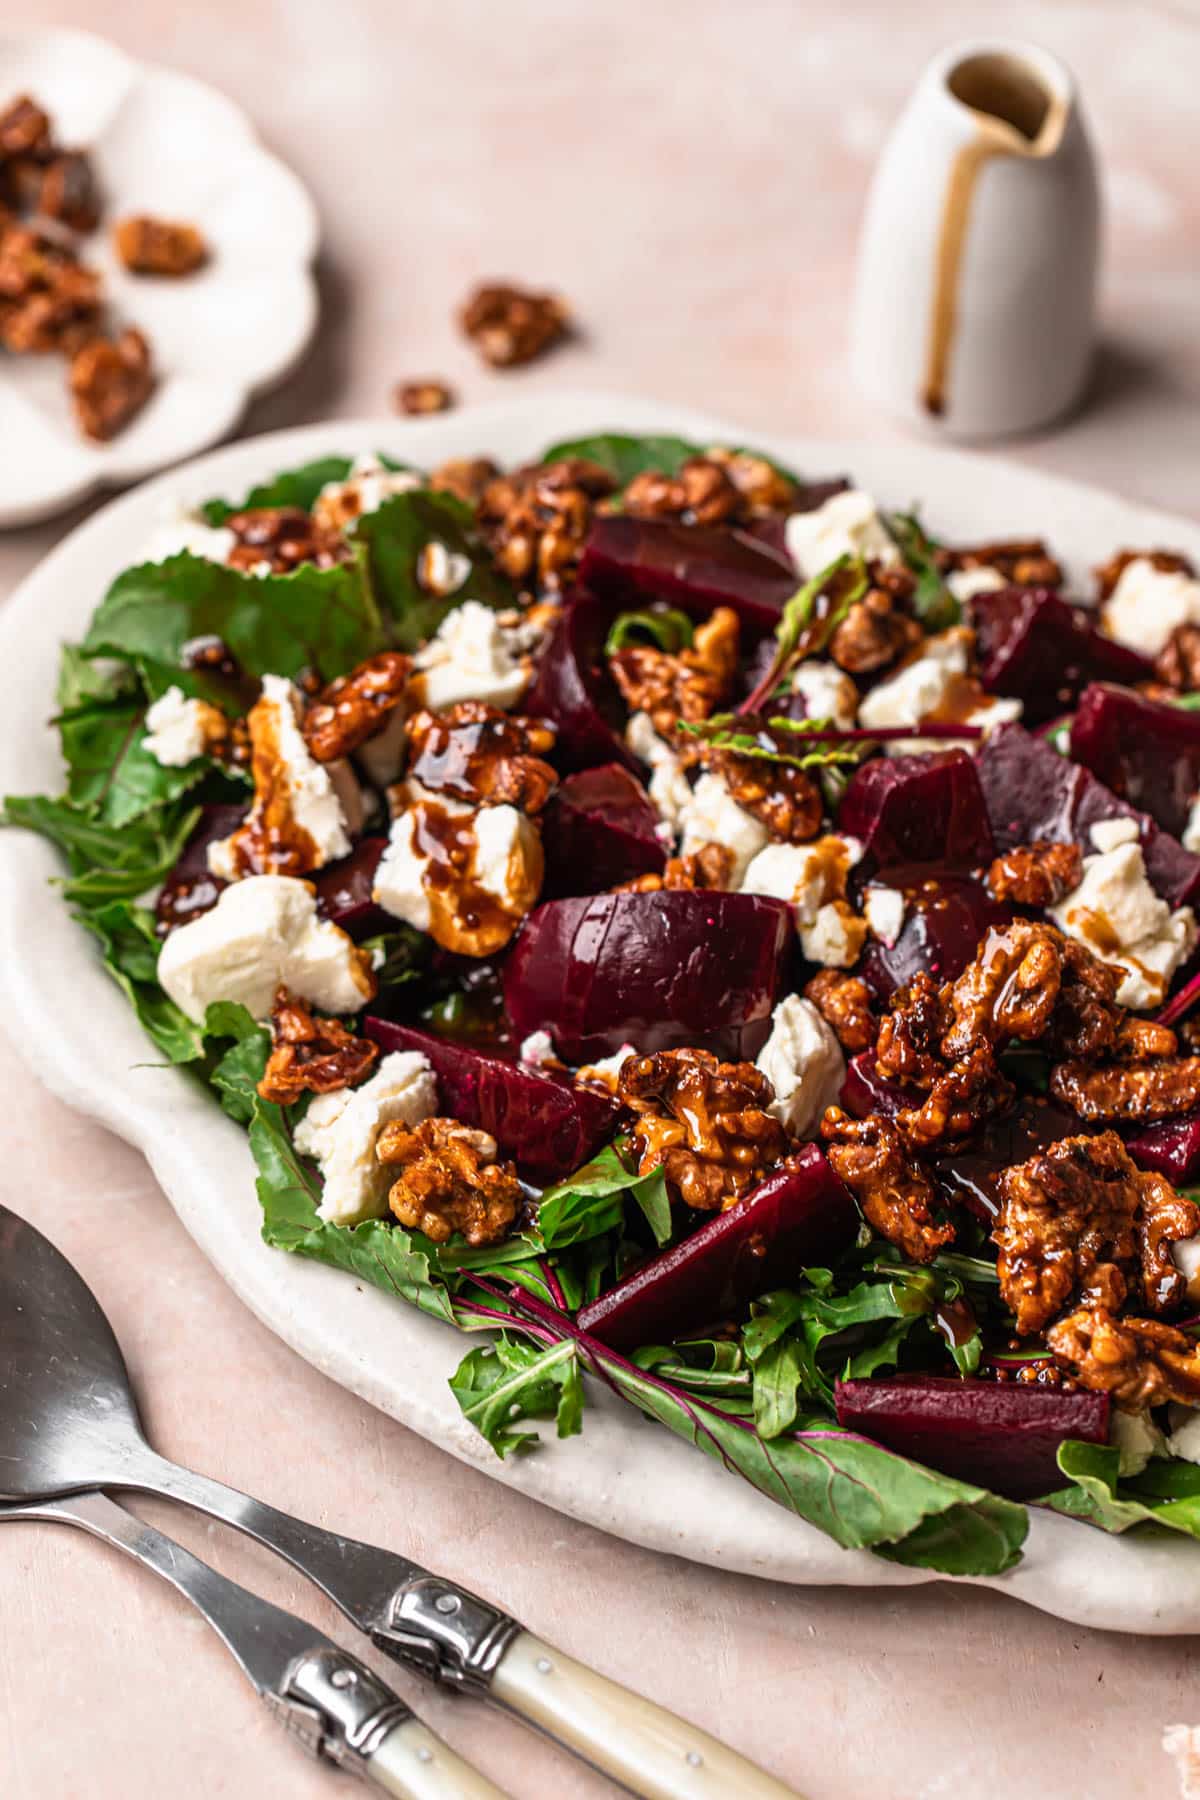 Beetroot salad with goat's cheese, honey candied walnuts and balsamic dressing, on a white serving platter.